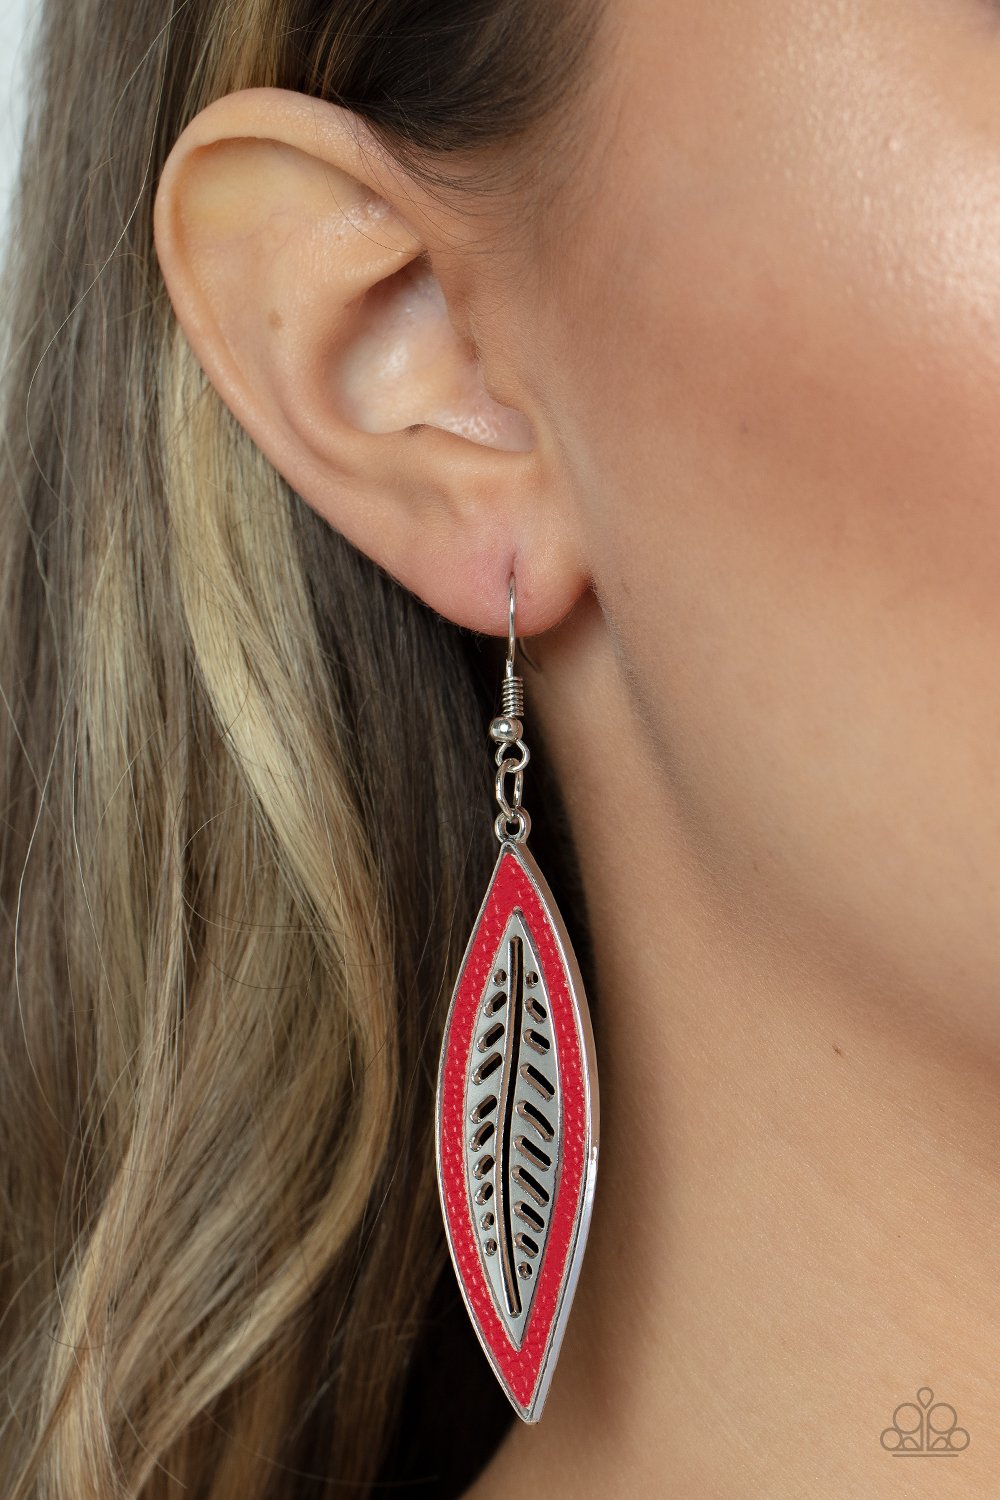 Paparazzi Accessories - Leather Lagoon - Red Earrings